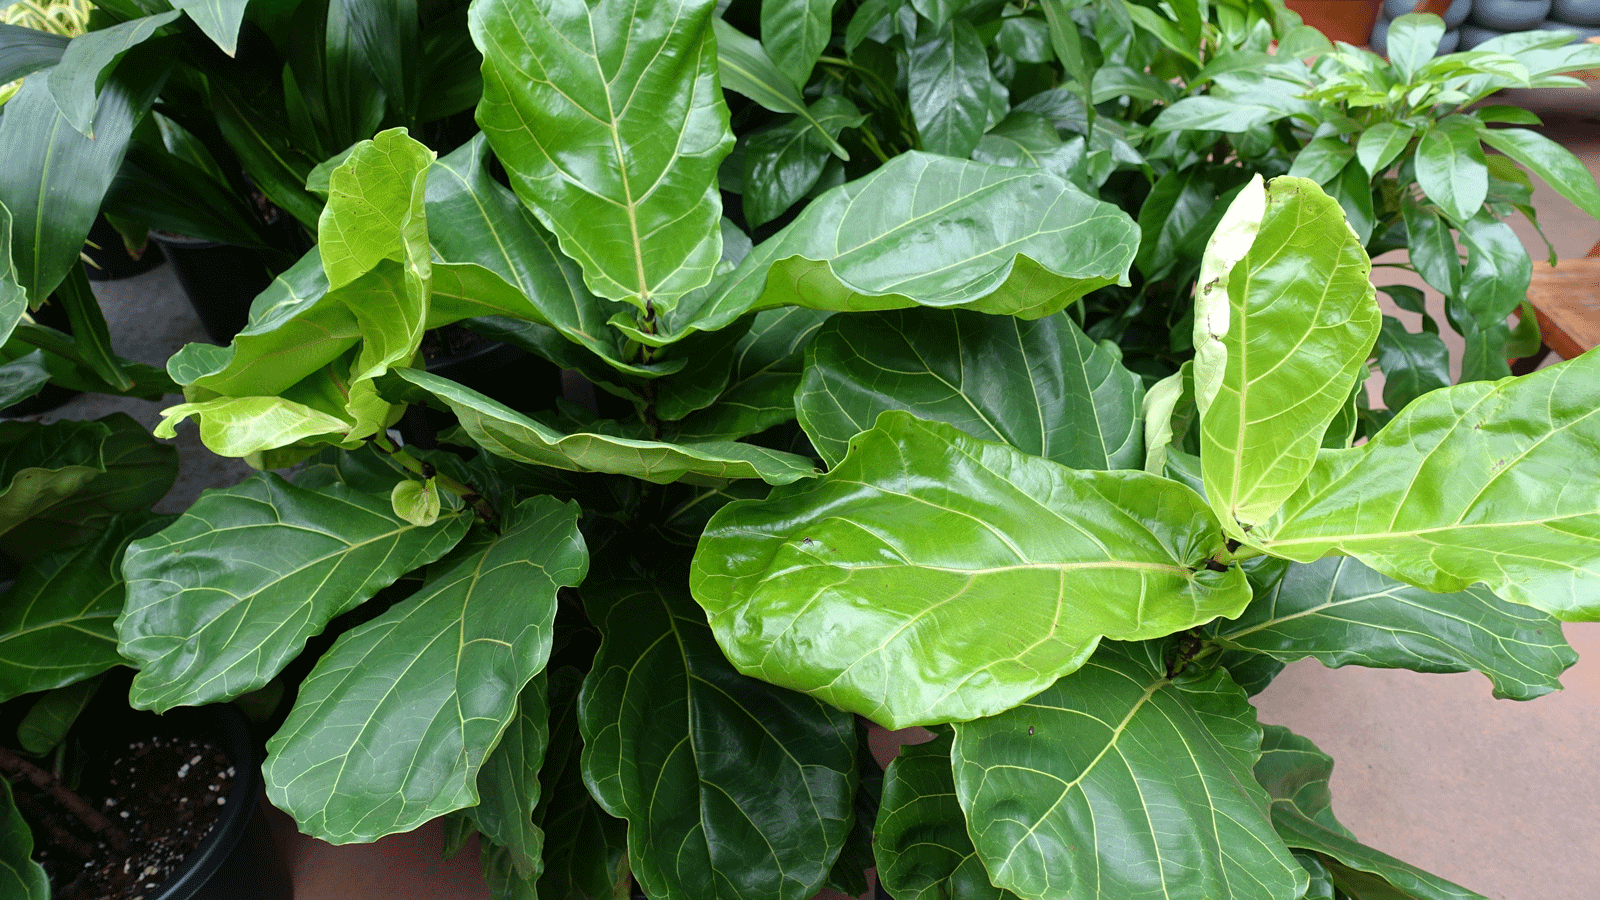 Why is fiddle leaf fig leaves?